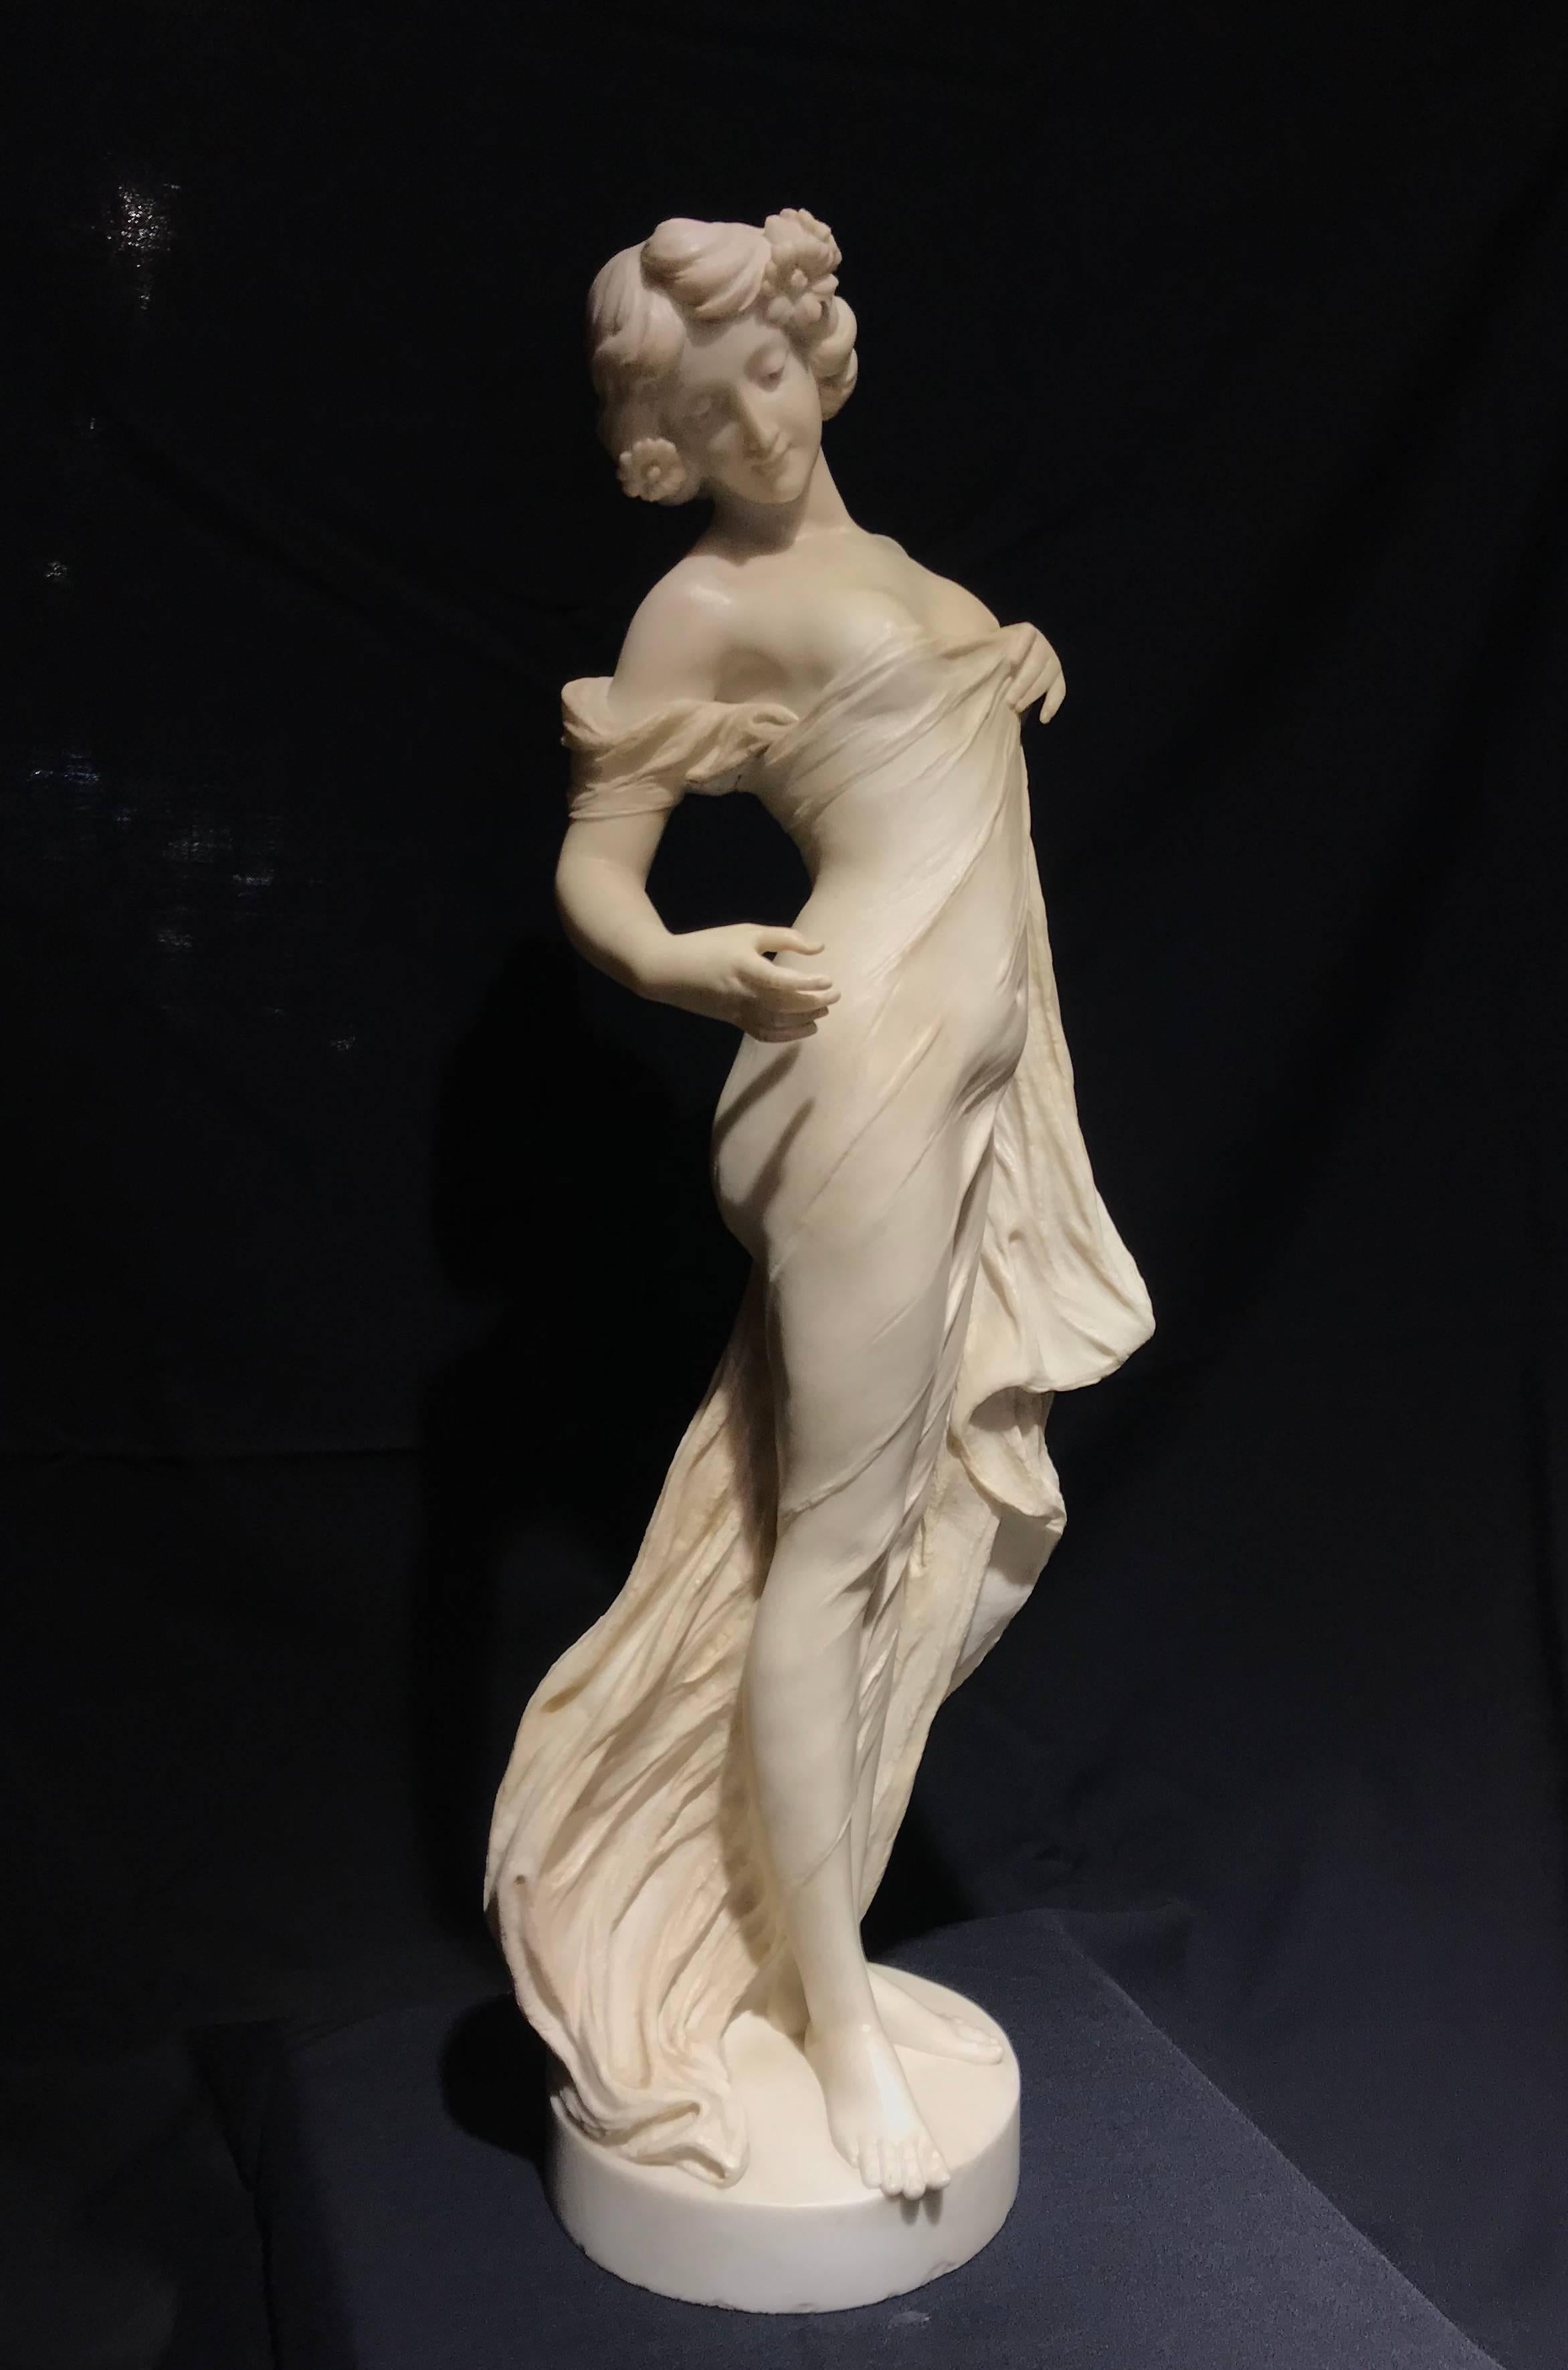 A very beautiful and elegant sculpture of a nymph, carved in Italy and with the typical character and signs of the artworks made in Florence in the 19th century. This huge and impressive for the quality of the carving sculpture is attributed to the